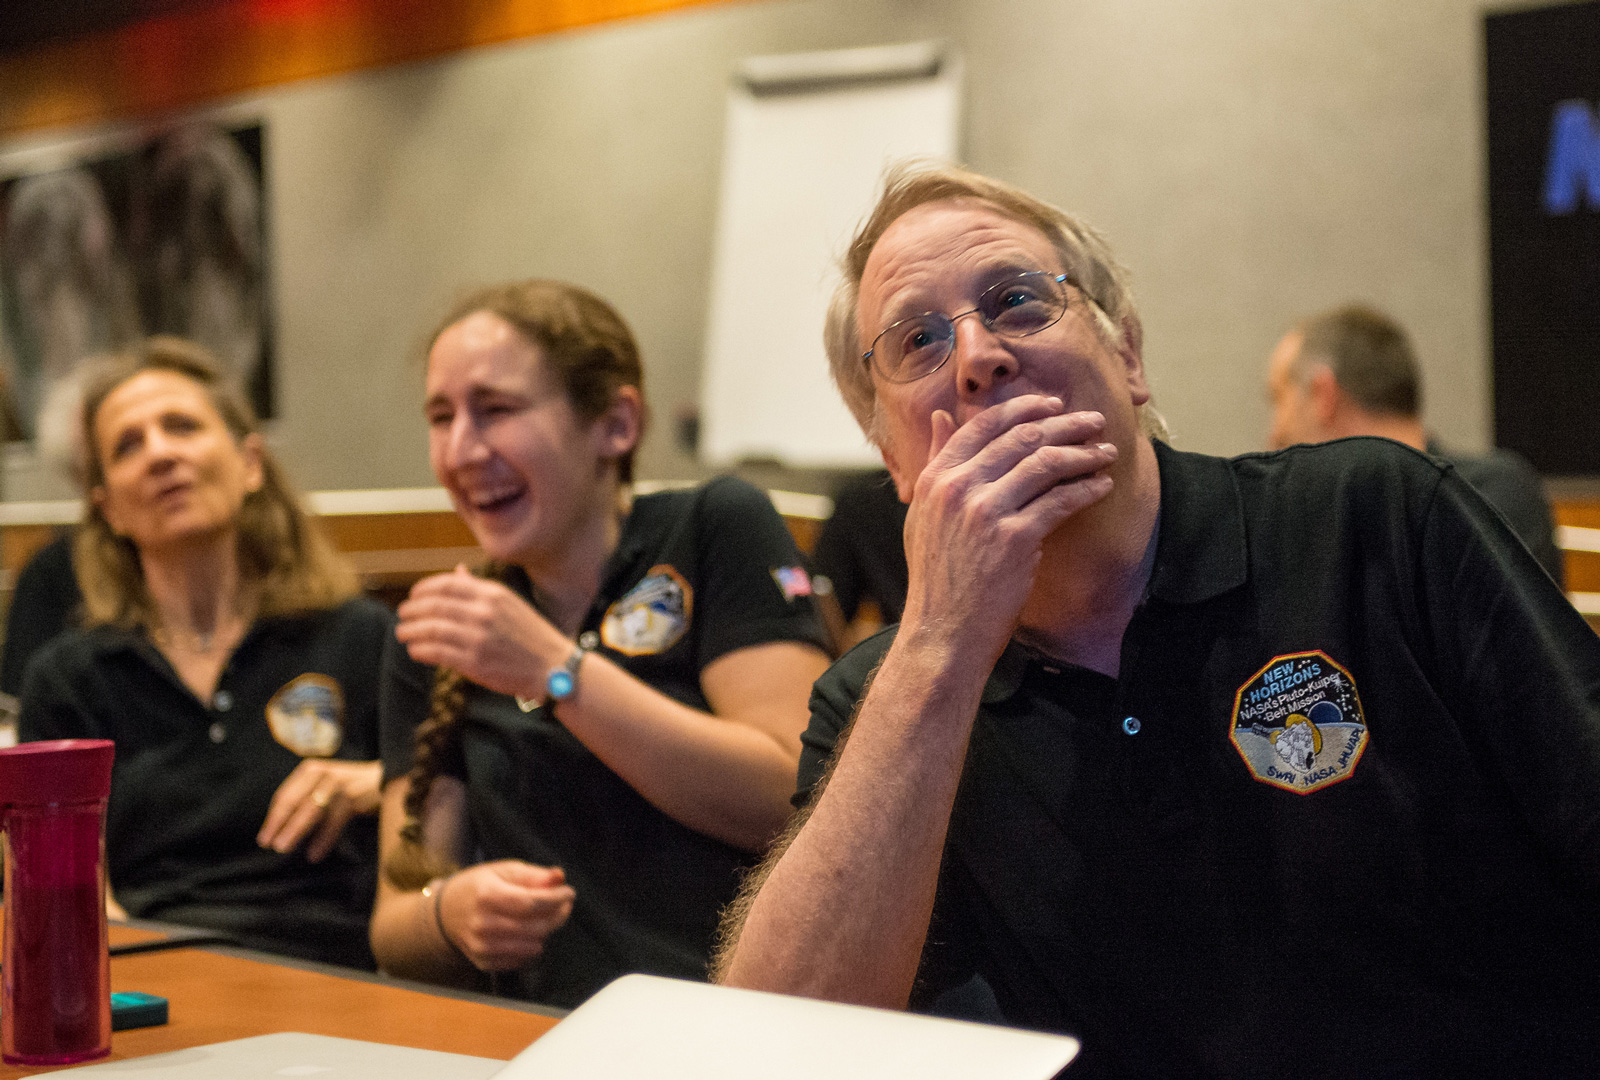 Two women and a man react with joy at seeing the first images of Pluto.